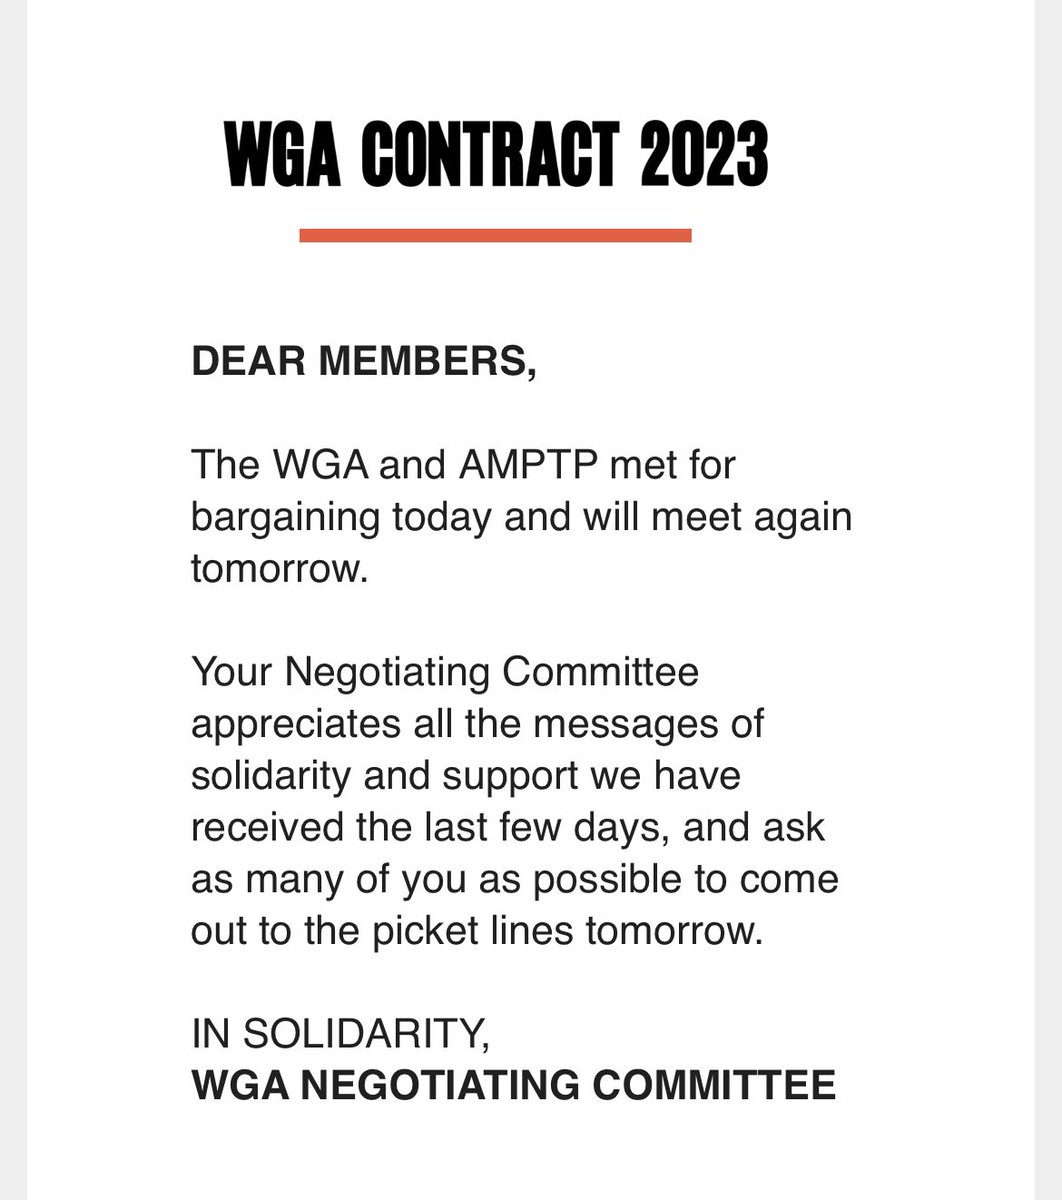 WGA CONTRACT 2023DEAR MEMBERS,The WGA and AMPTP met for bargaining today and will meet againtomorrow.Your Negotiating Committee appreciates all the messages of solidarity and support we have received the last few days, and ask as many of you as possible to come out to the picket lines tomorrow.IN SOLIDARITY, WGA NEGOTIATING COMMITTEE